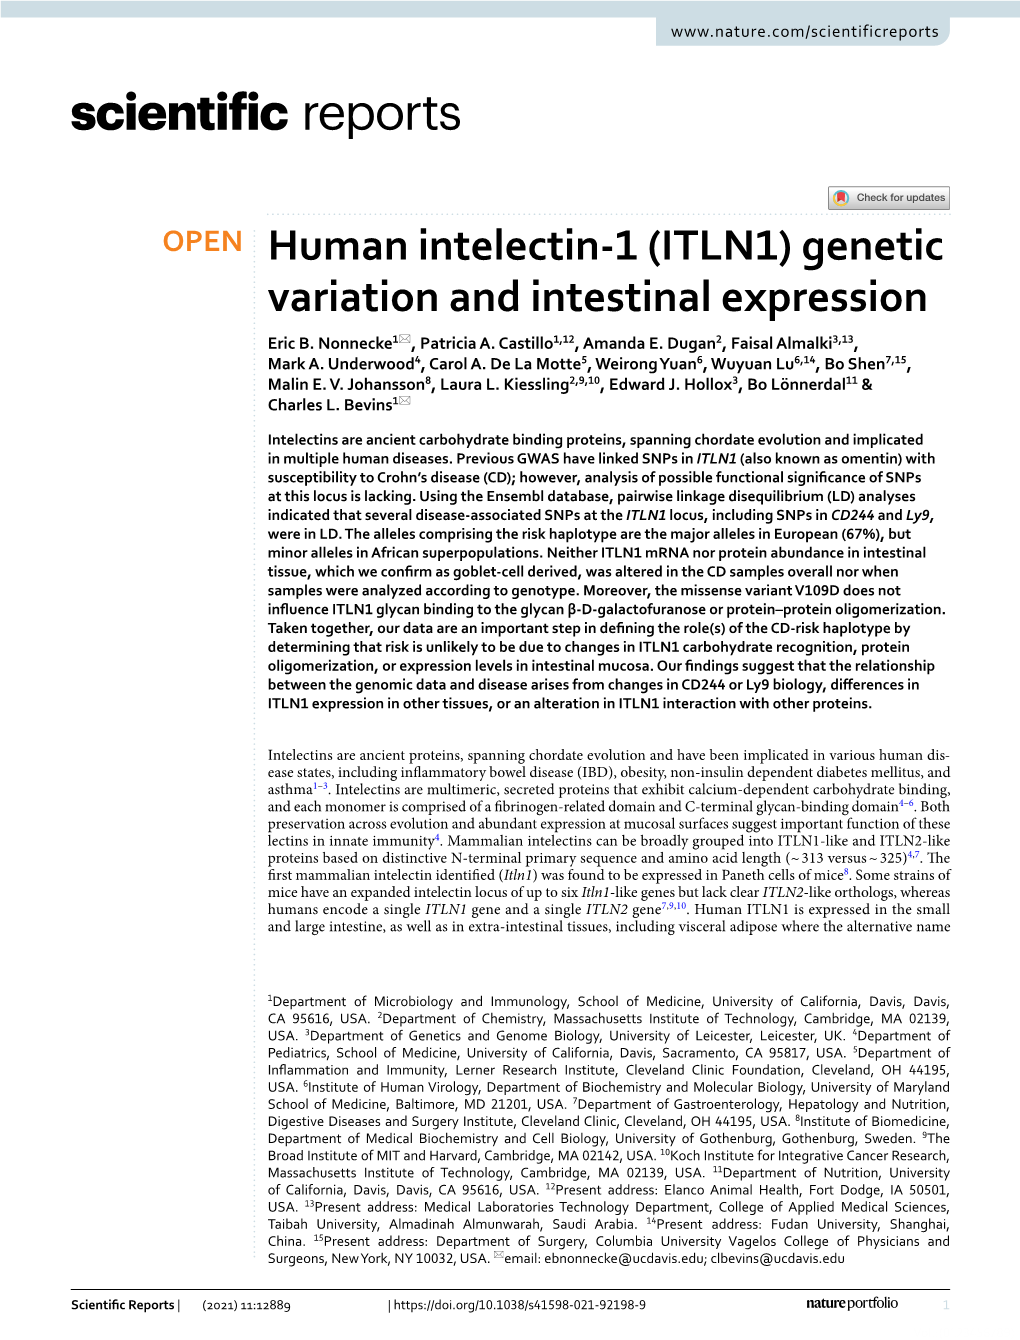 Human Intelectin-1 (ITLN1) Genetic Variation and Intestinal Expression